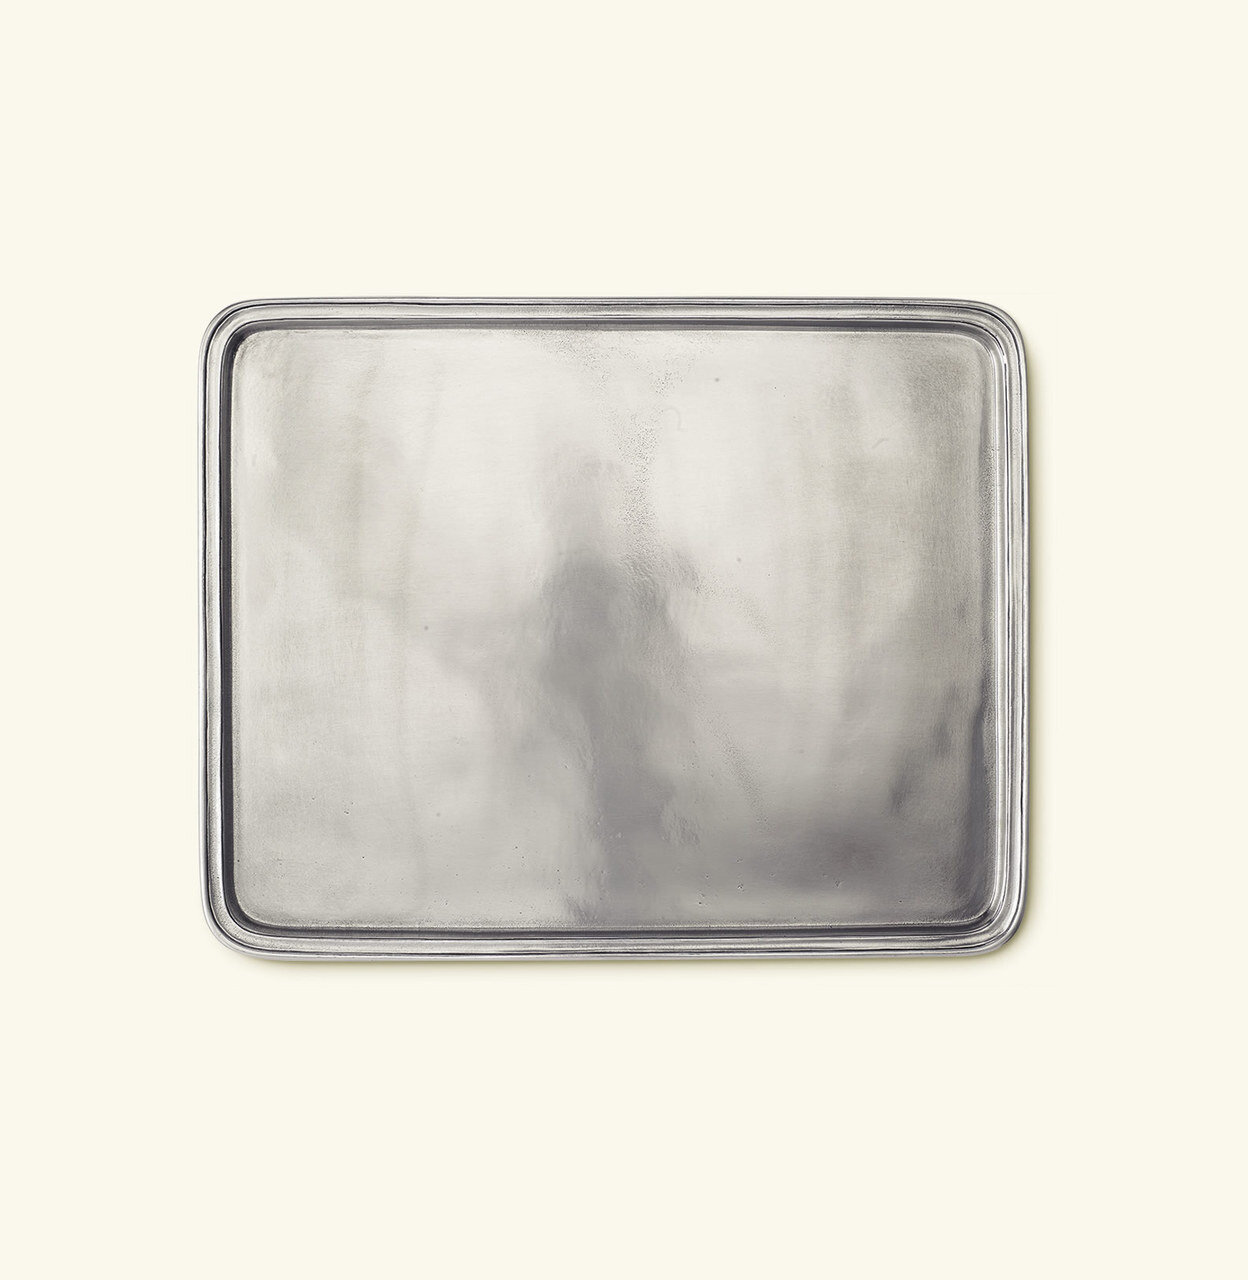 Match Pewter Rectangle Tray Large 964.7